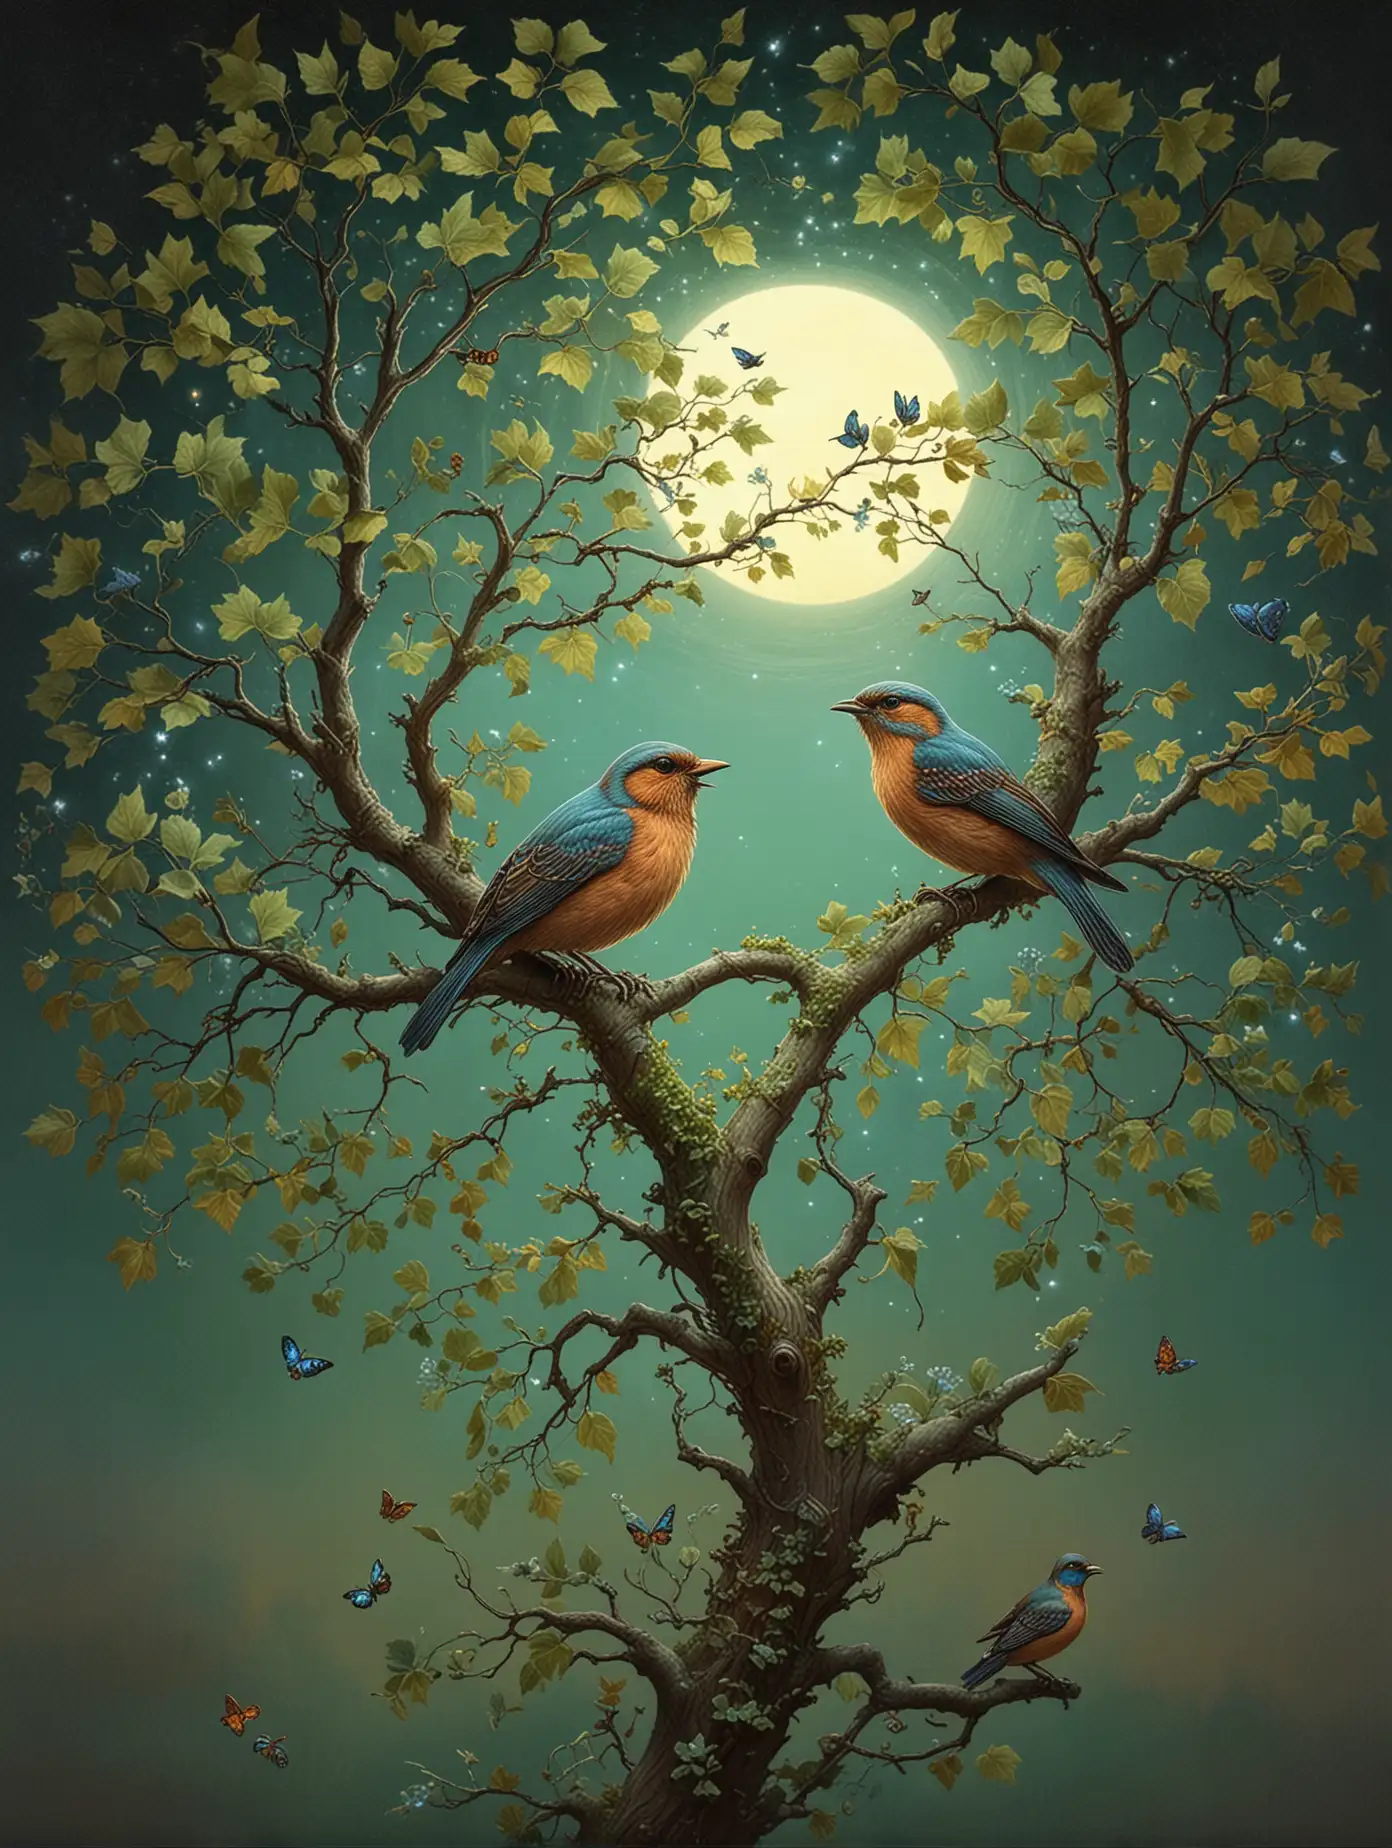 night, two birds singing on a green leaved sycamore tree branch, pastel colors, vintage, kerem beyit, by Daniel Merriam, esao andrews, ornate, by Kerembeyit, inspired by Daniel Merriam, by Jan Kip, daniel merriam, butterfly, highly detailed digital artwork, antique, vintage, dusty, and rugged illustration